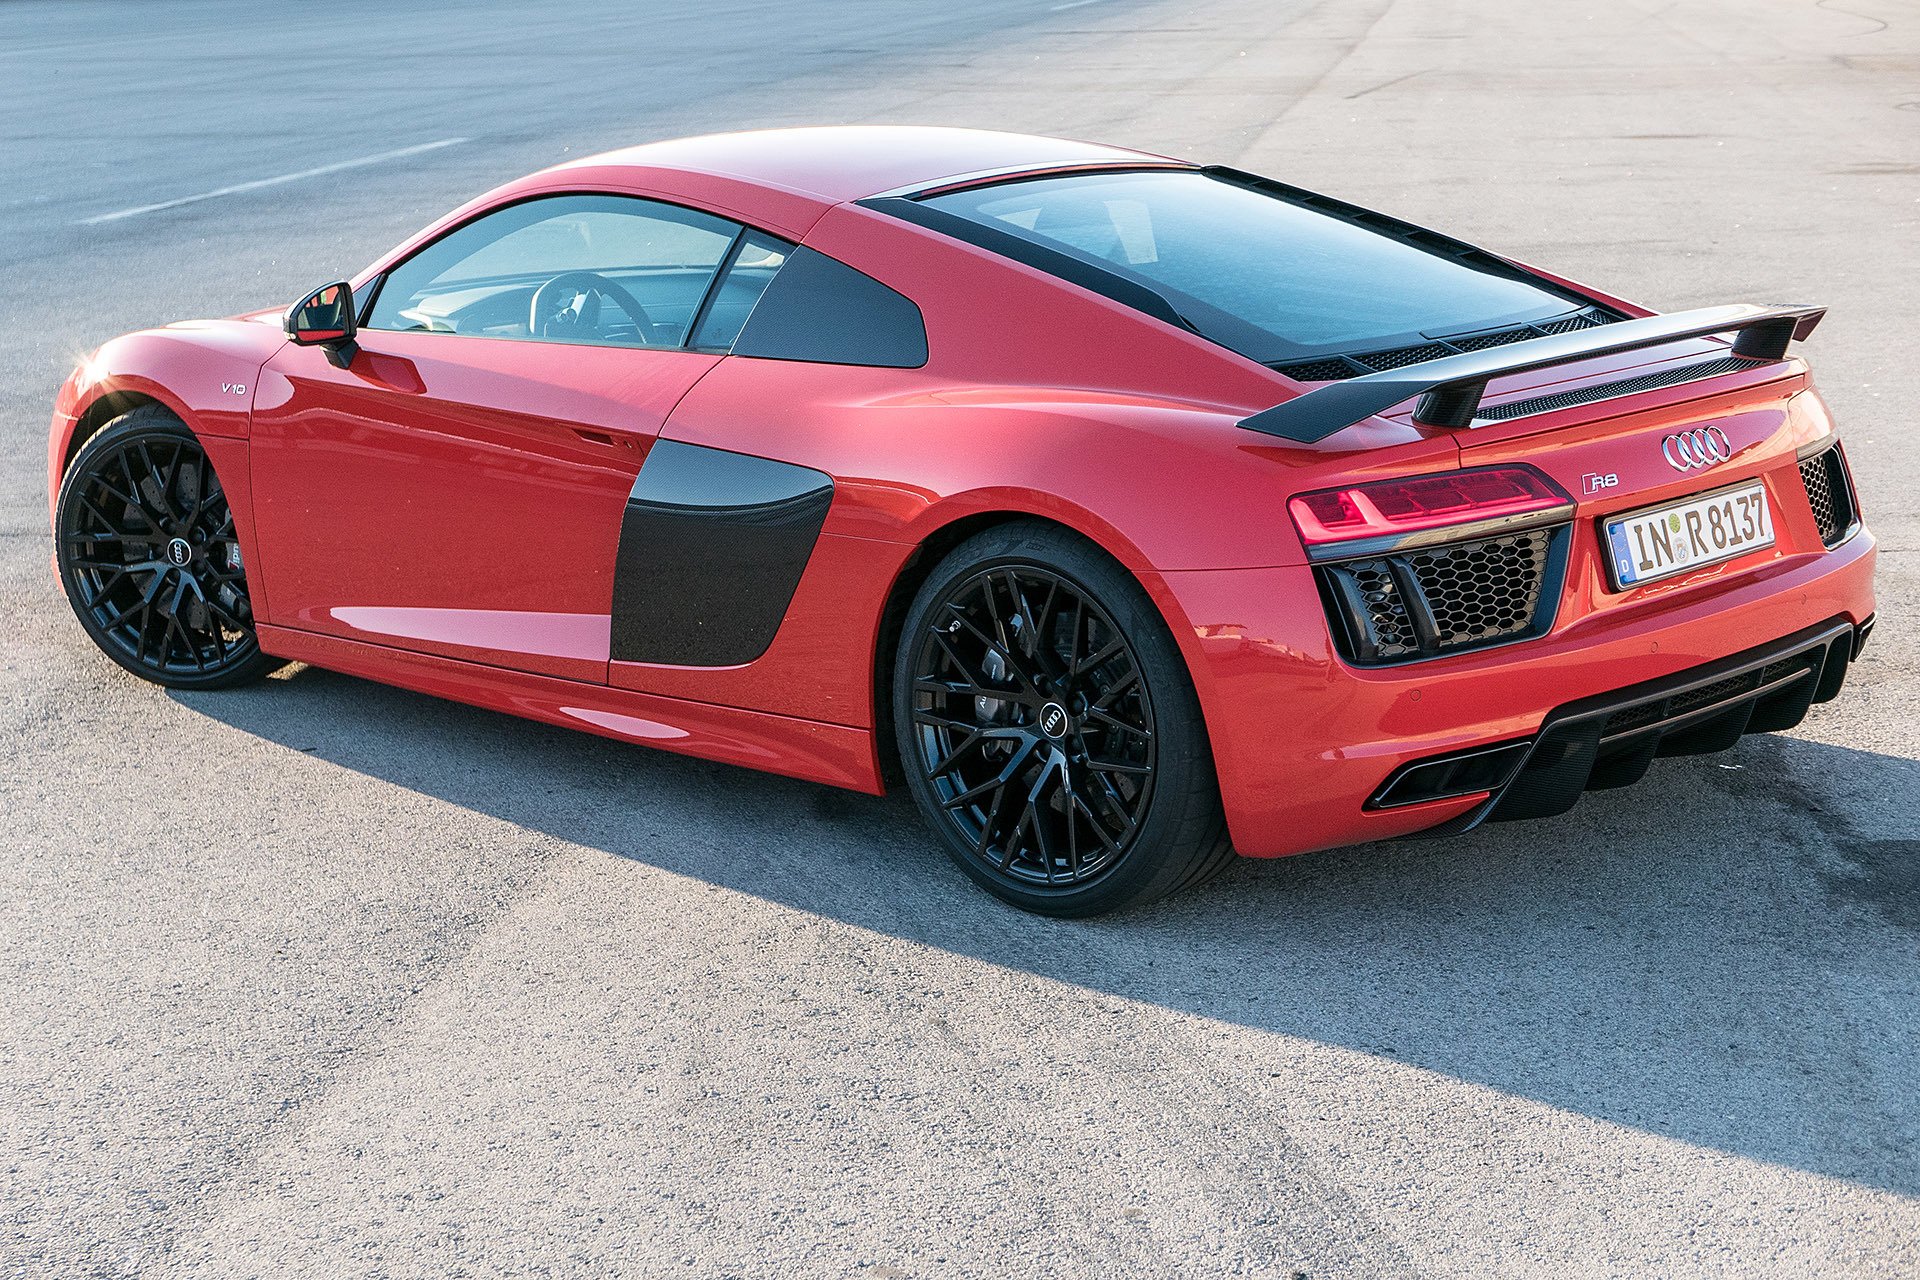 2017, Audi, R8, V10, Cars, Coupe, Red Wallpaper